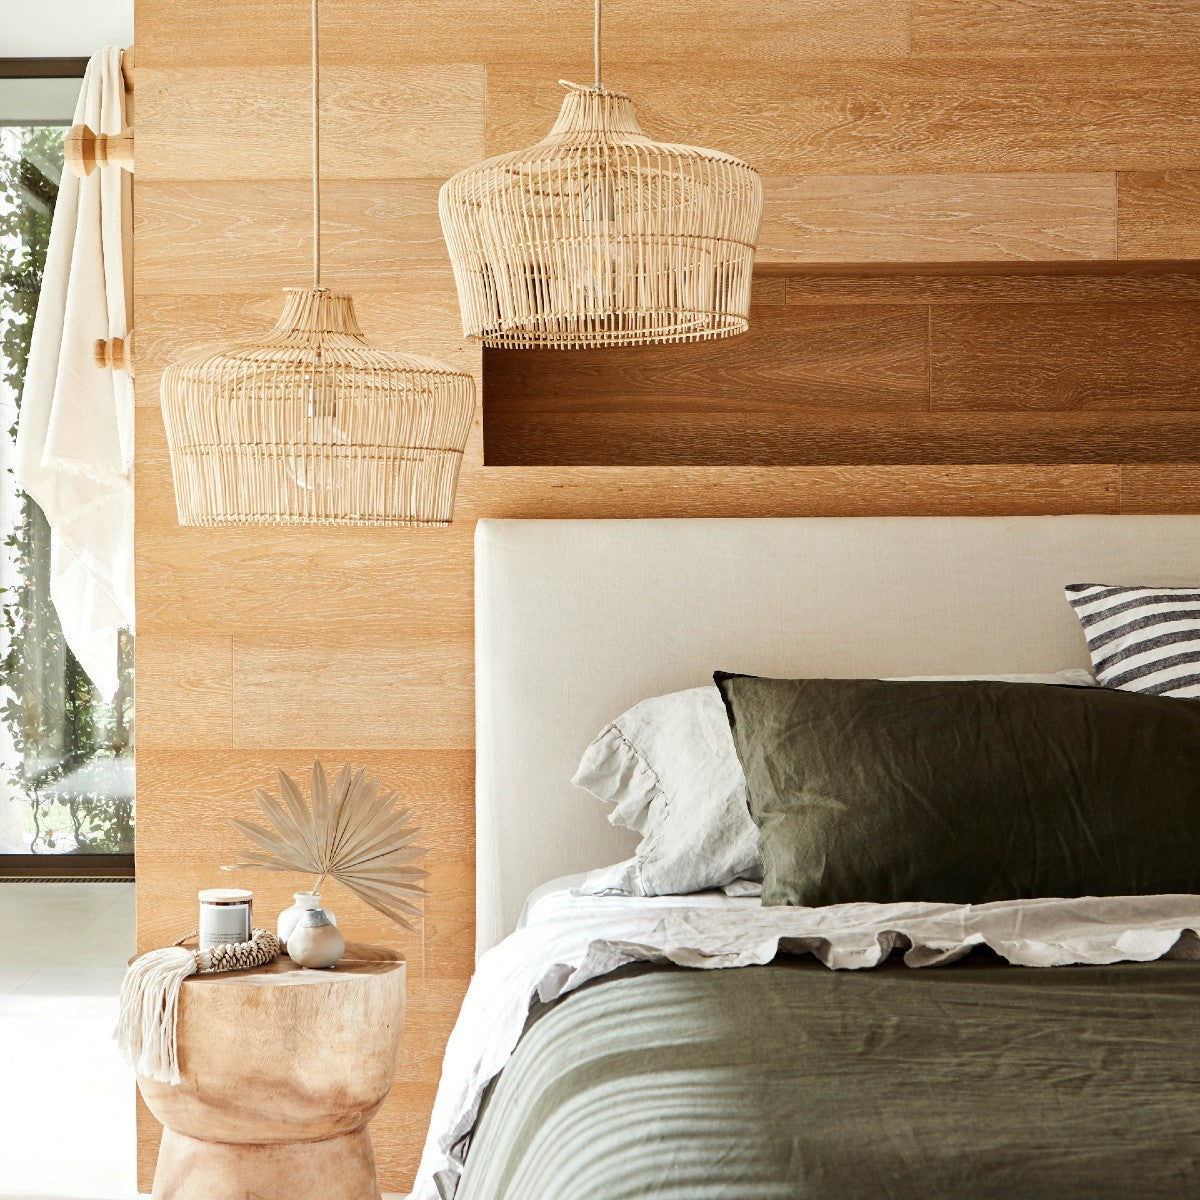 lifestyle-photo-of-2-coastal-style-double-layered-pendant-lights-suspended-as-bed-side-lights-above-a-bed-with-olive-green-linen